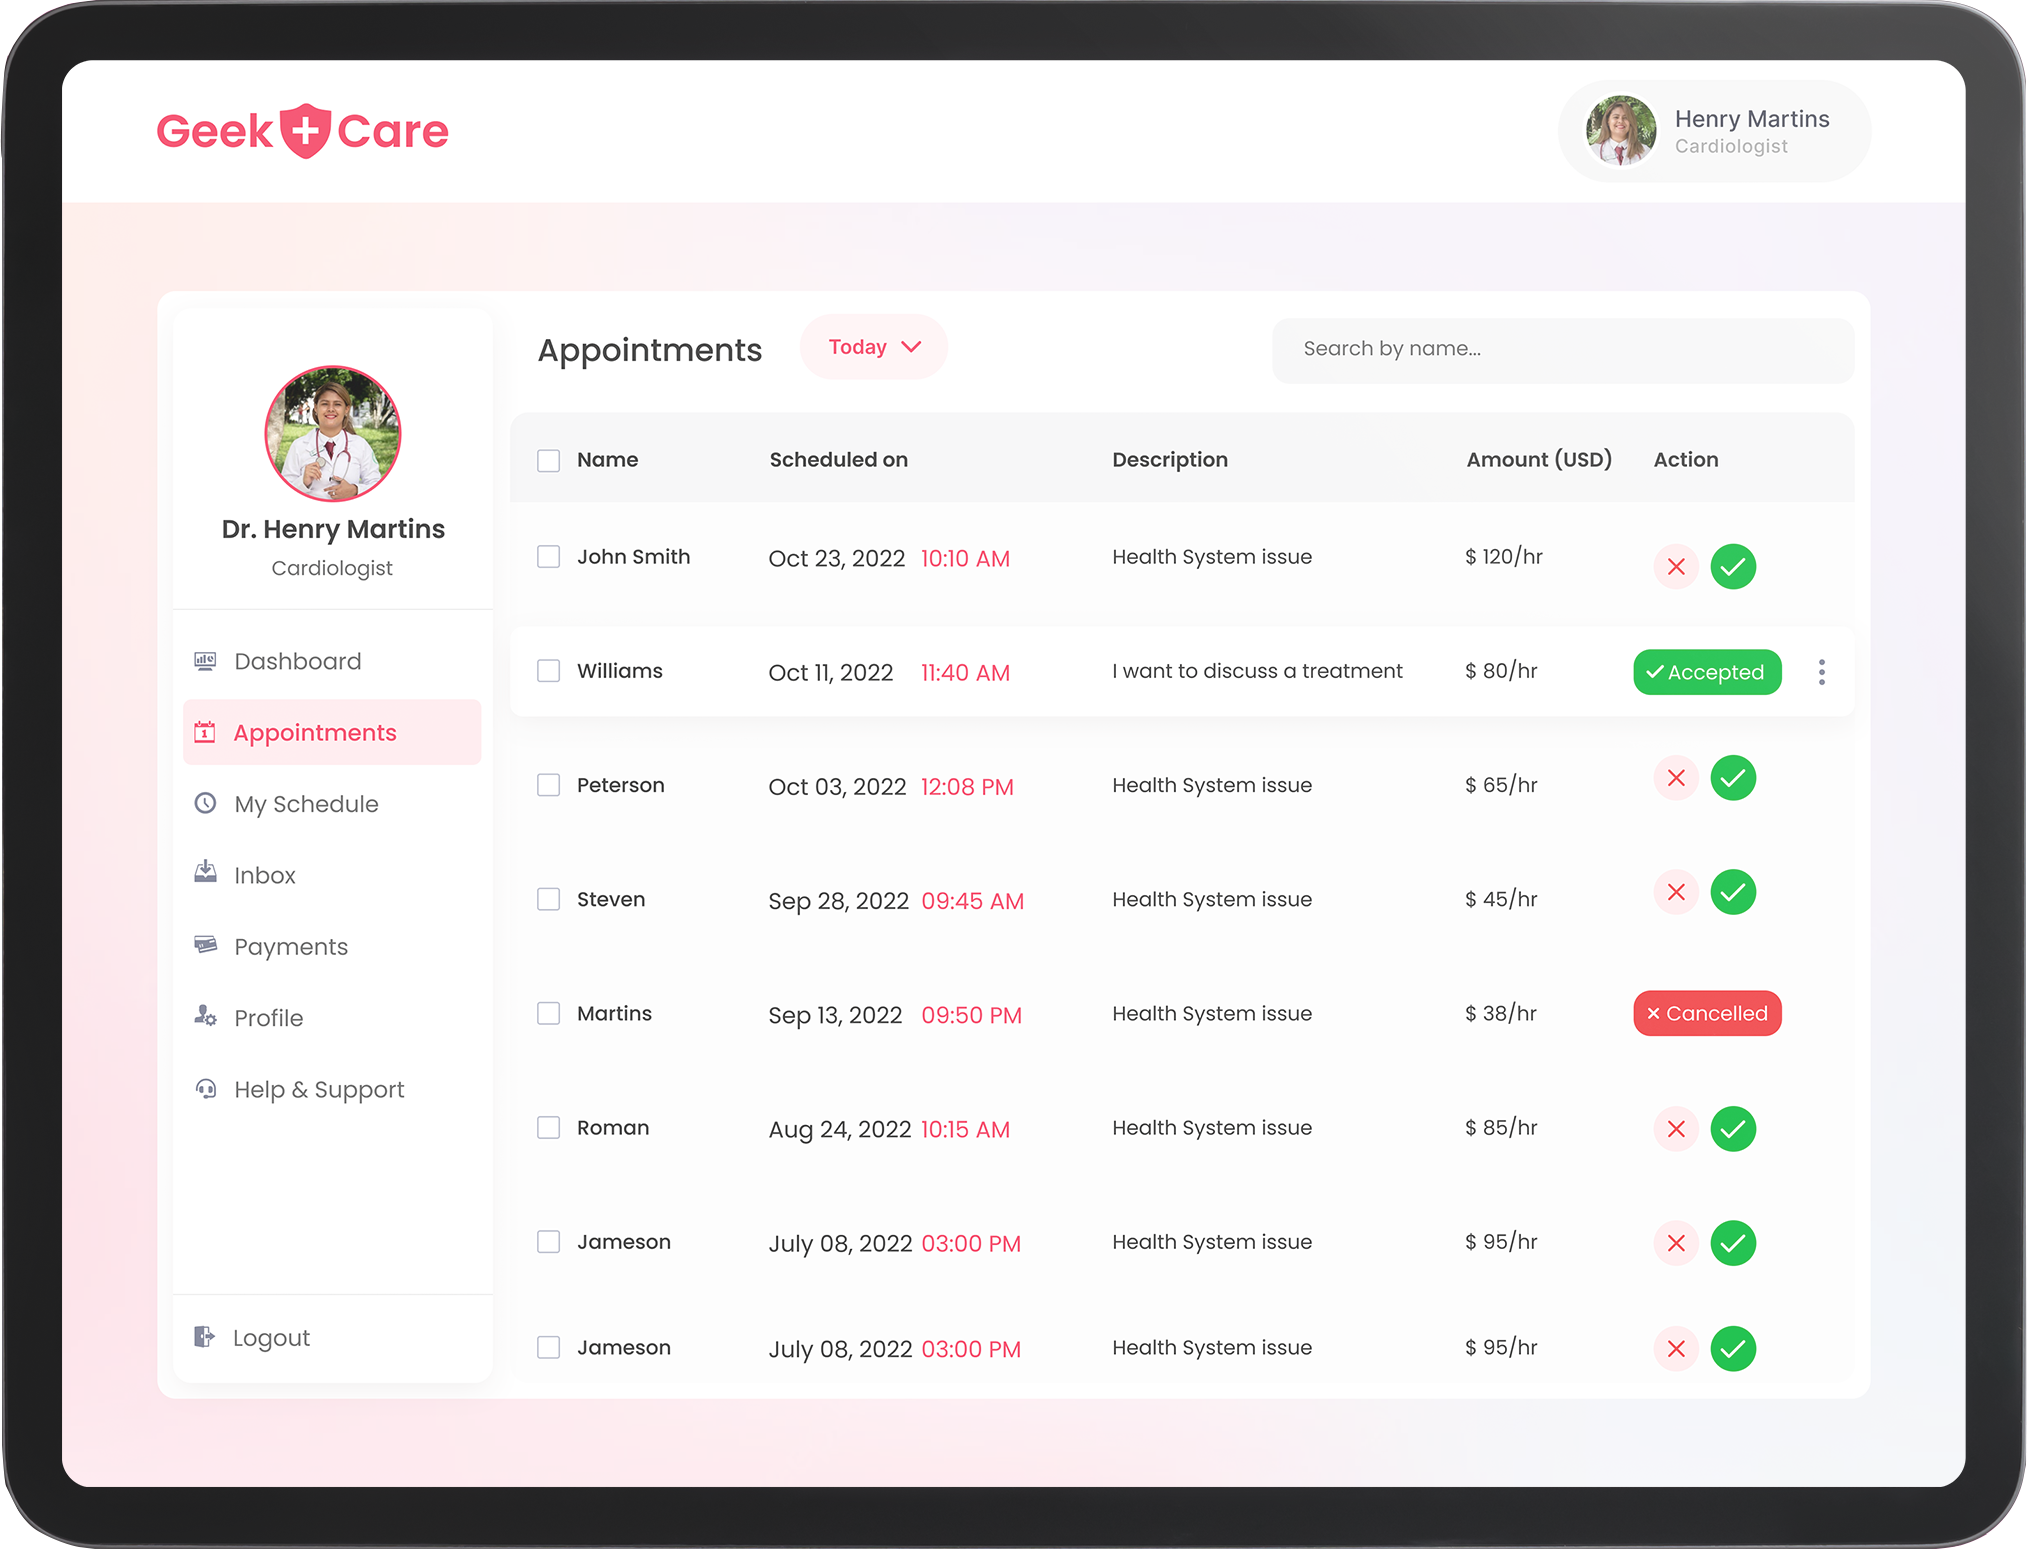 Appointments screen of healthcare app